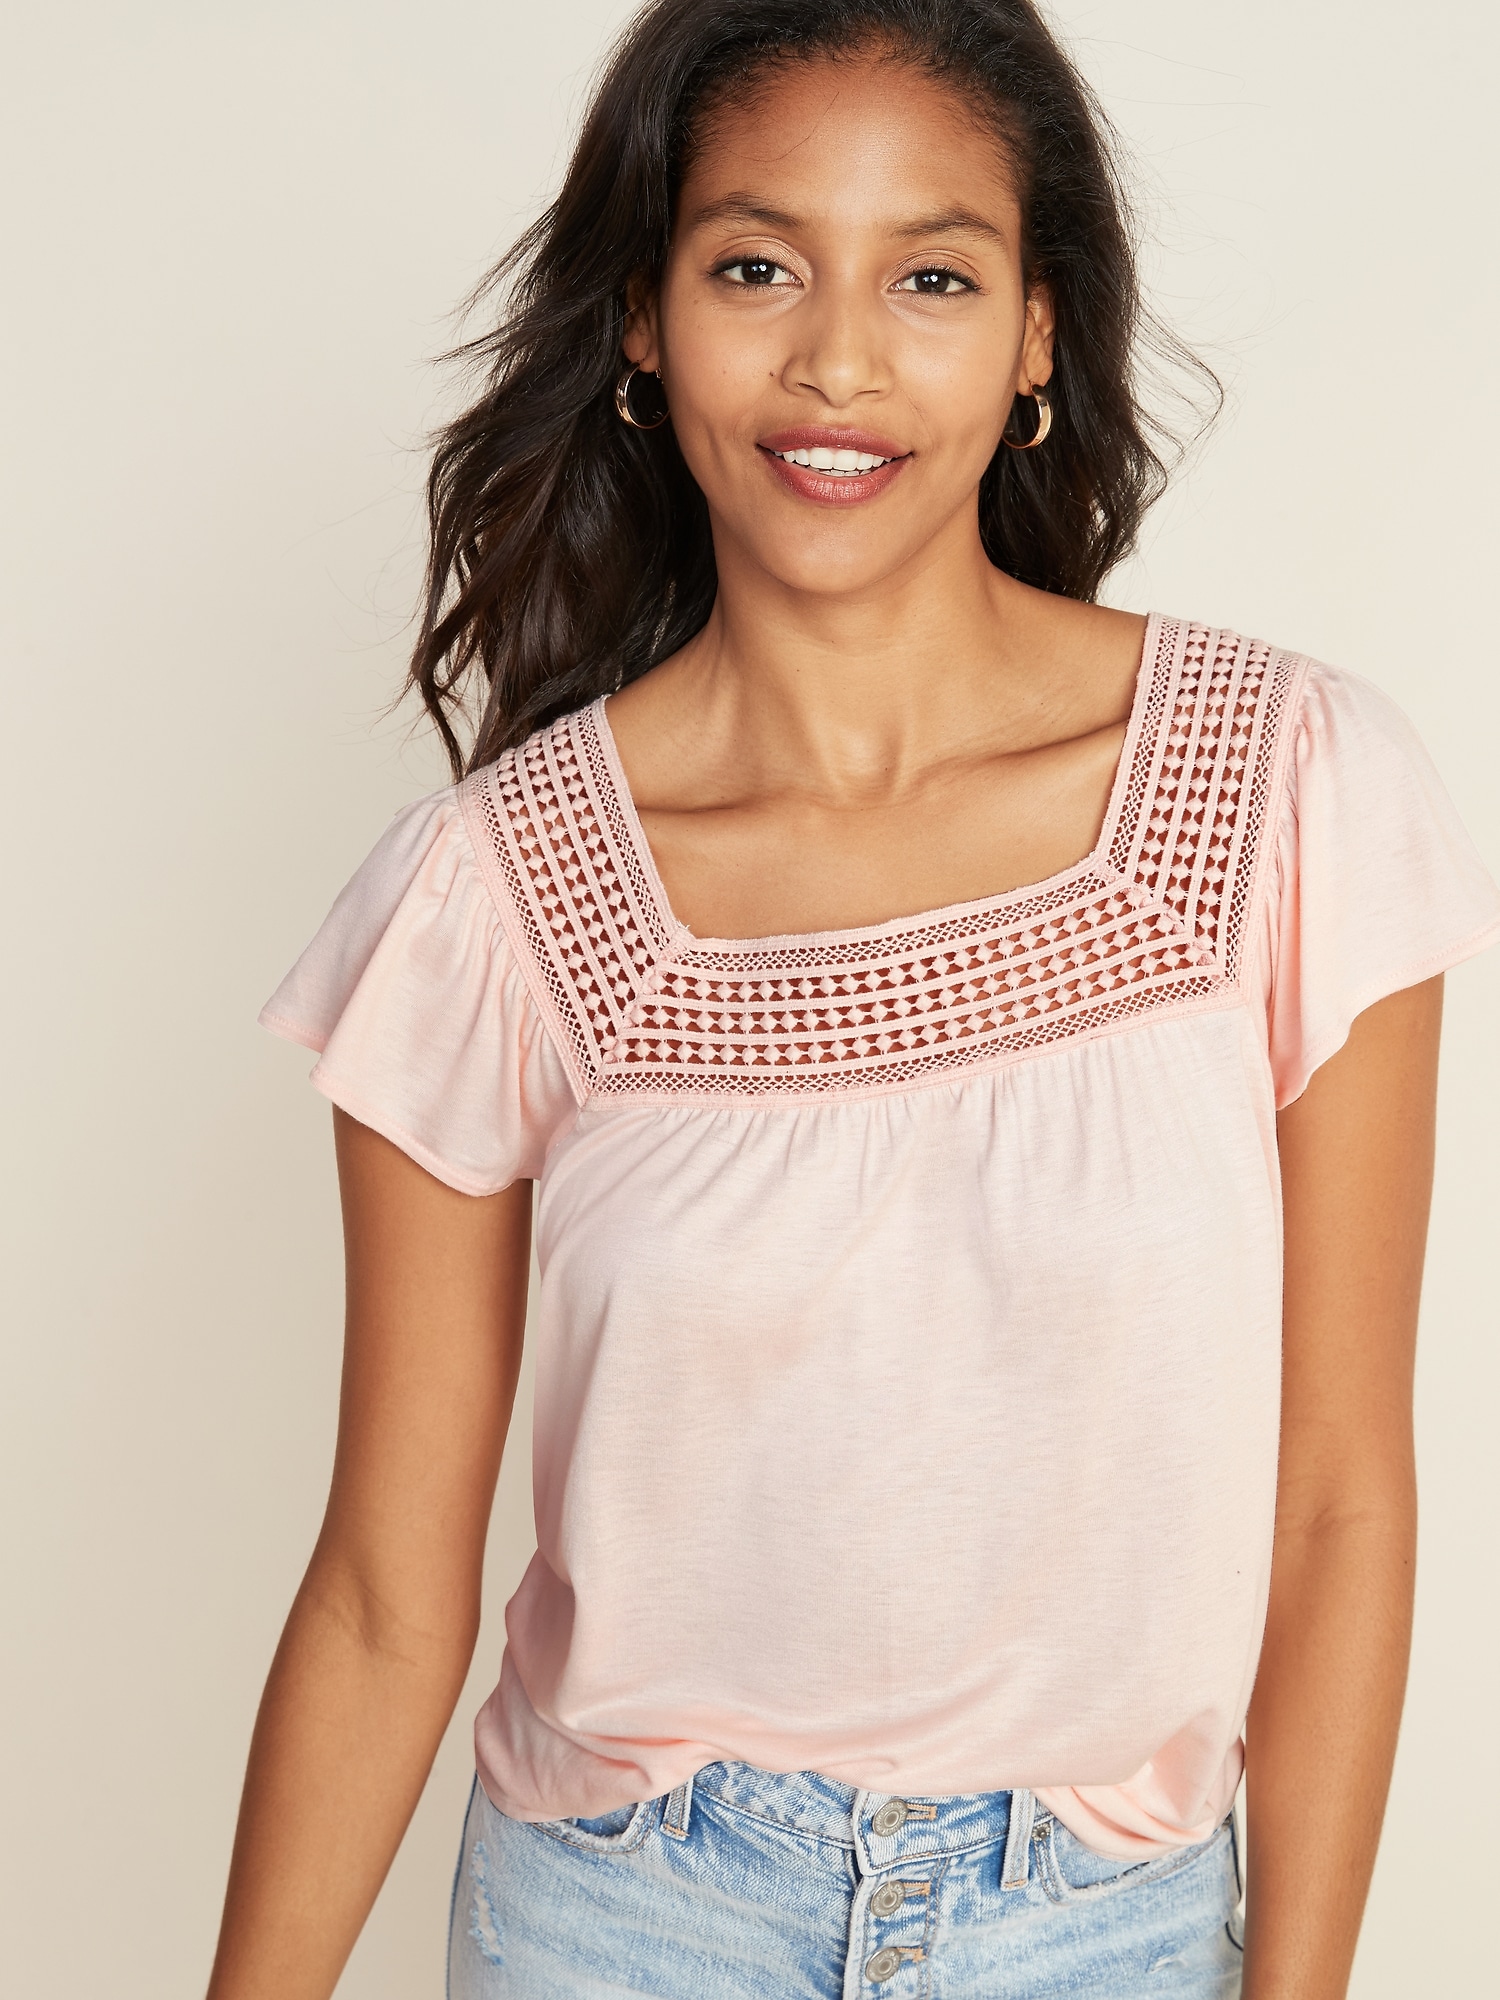 Gallery Lace Hem Square Neck Top